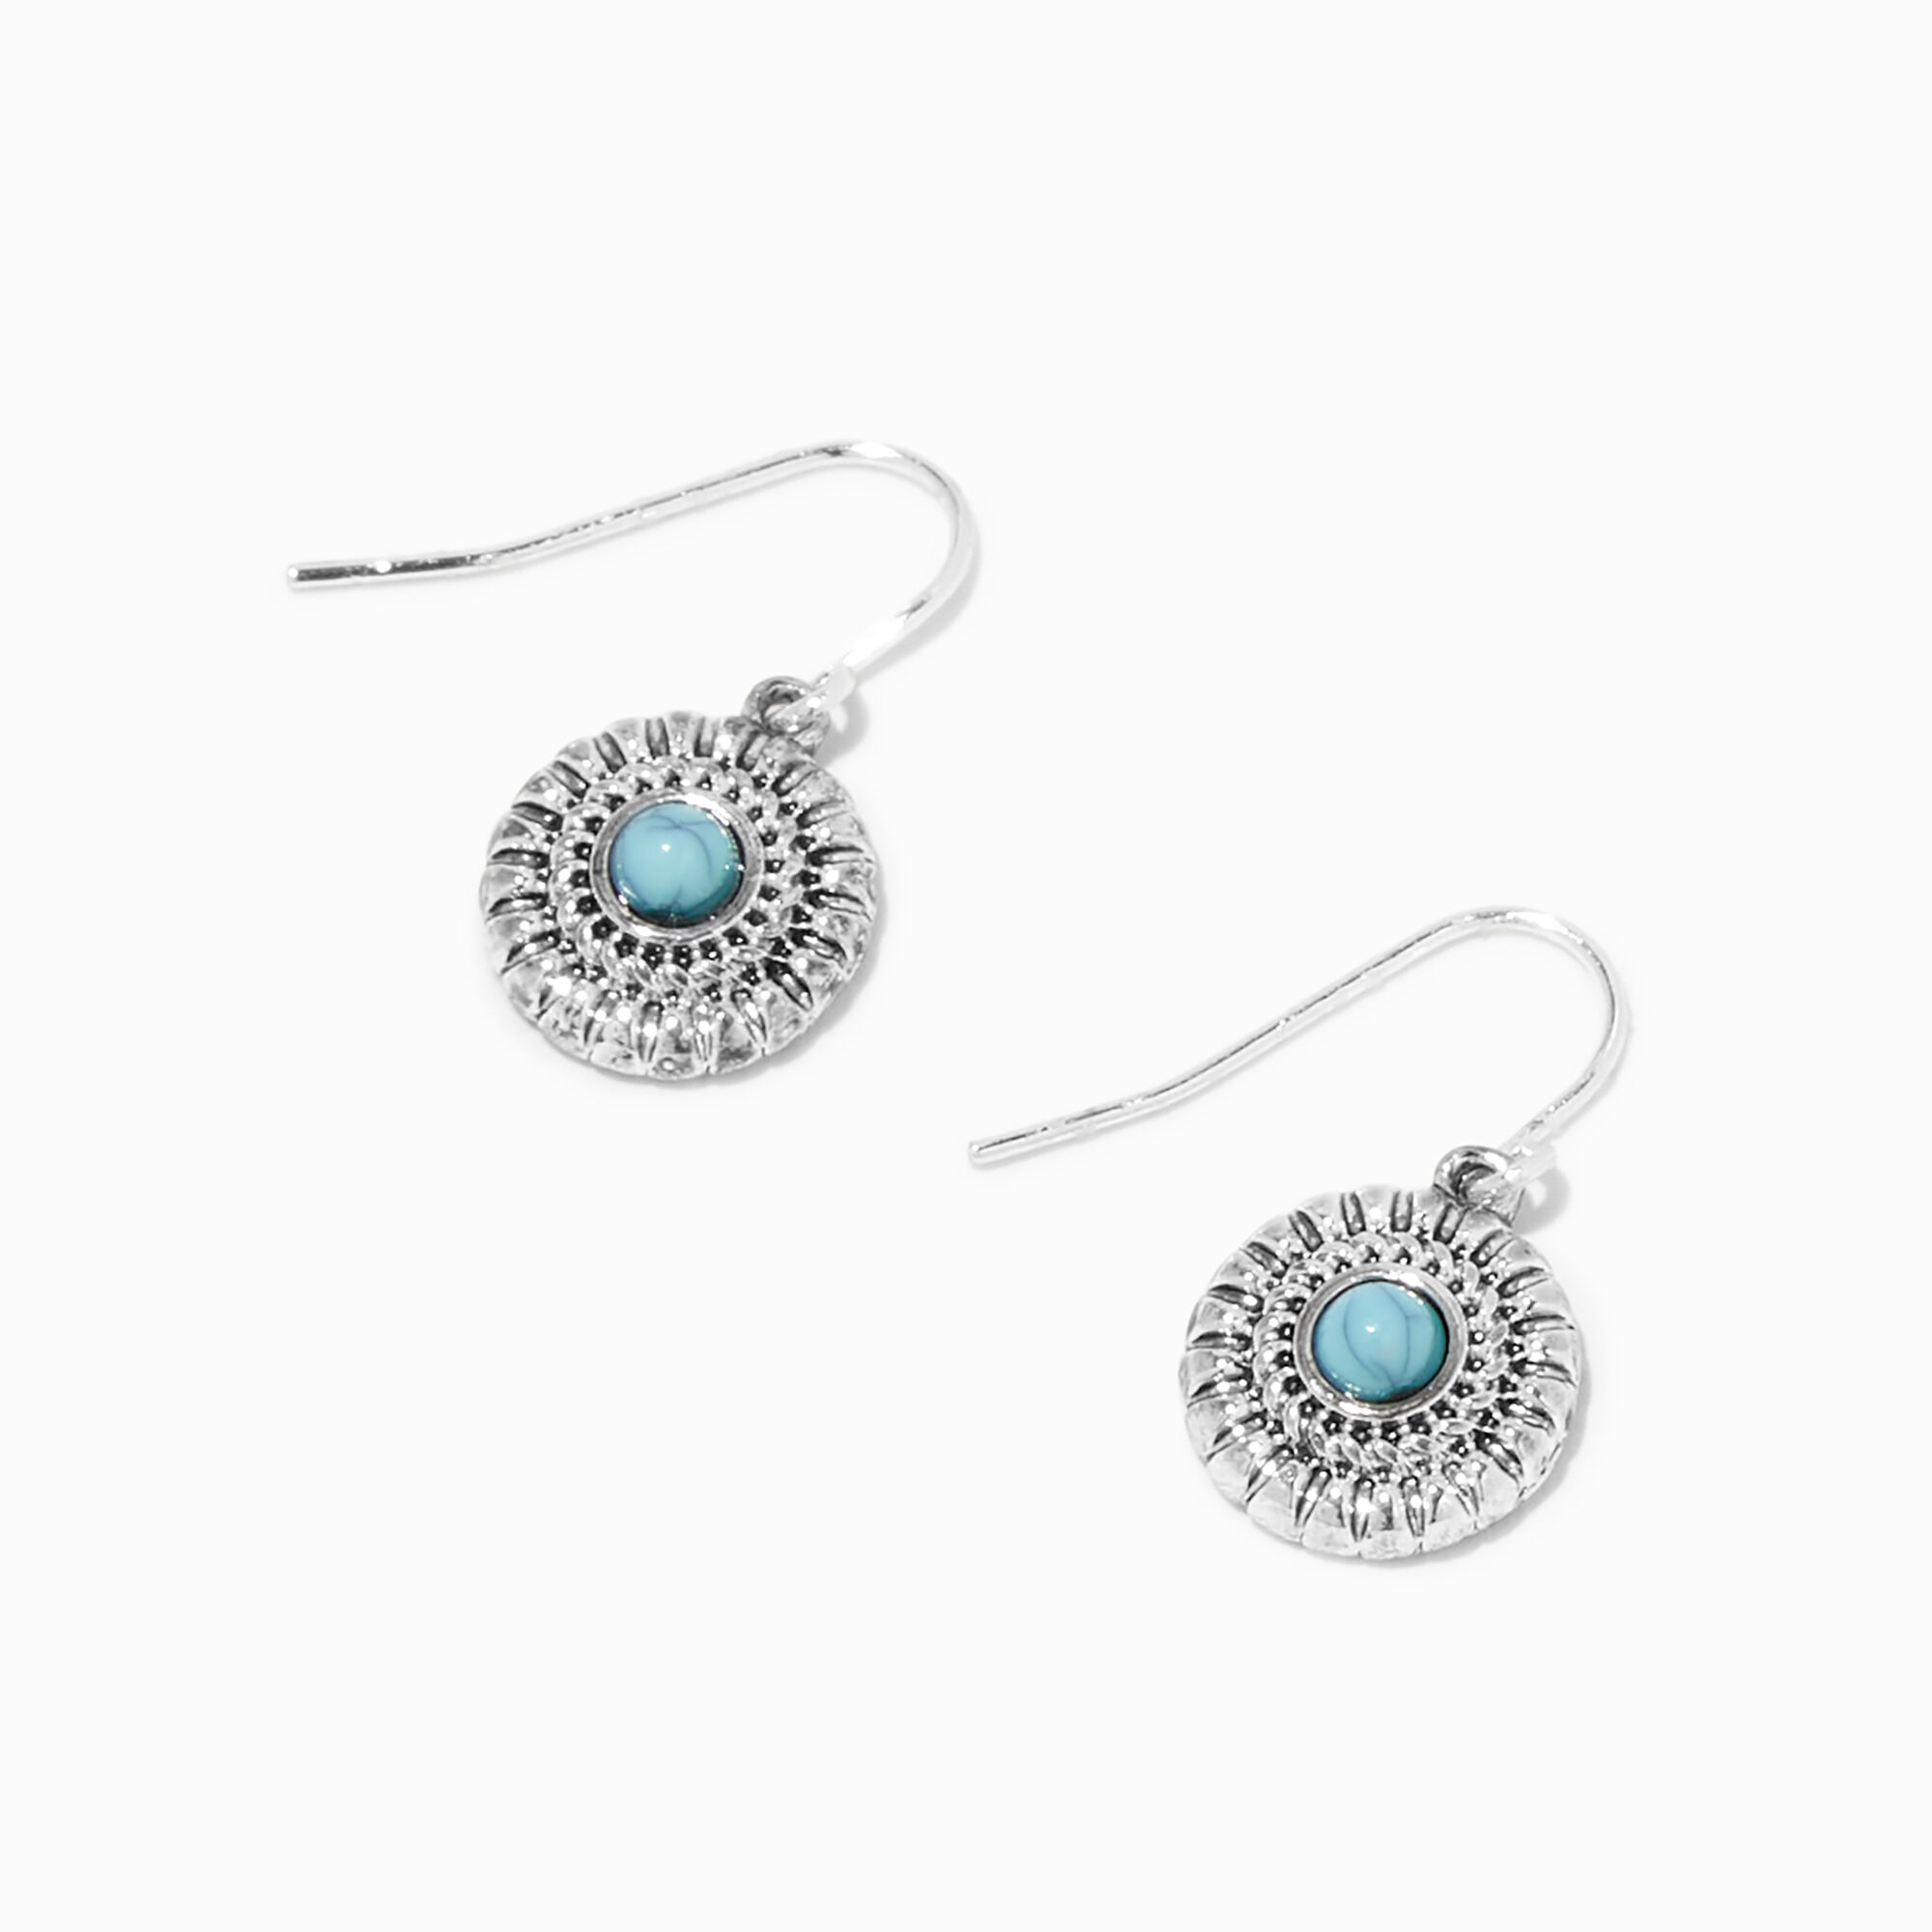 View Claires Filigree 1 Drop Earrings Turquoise information